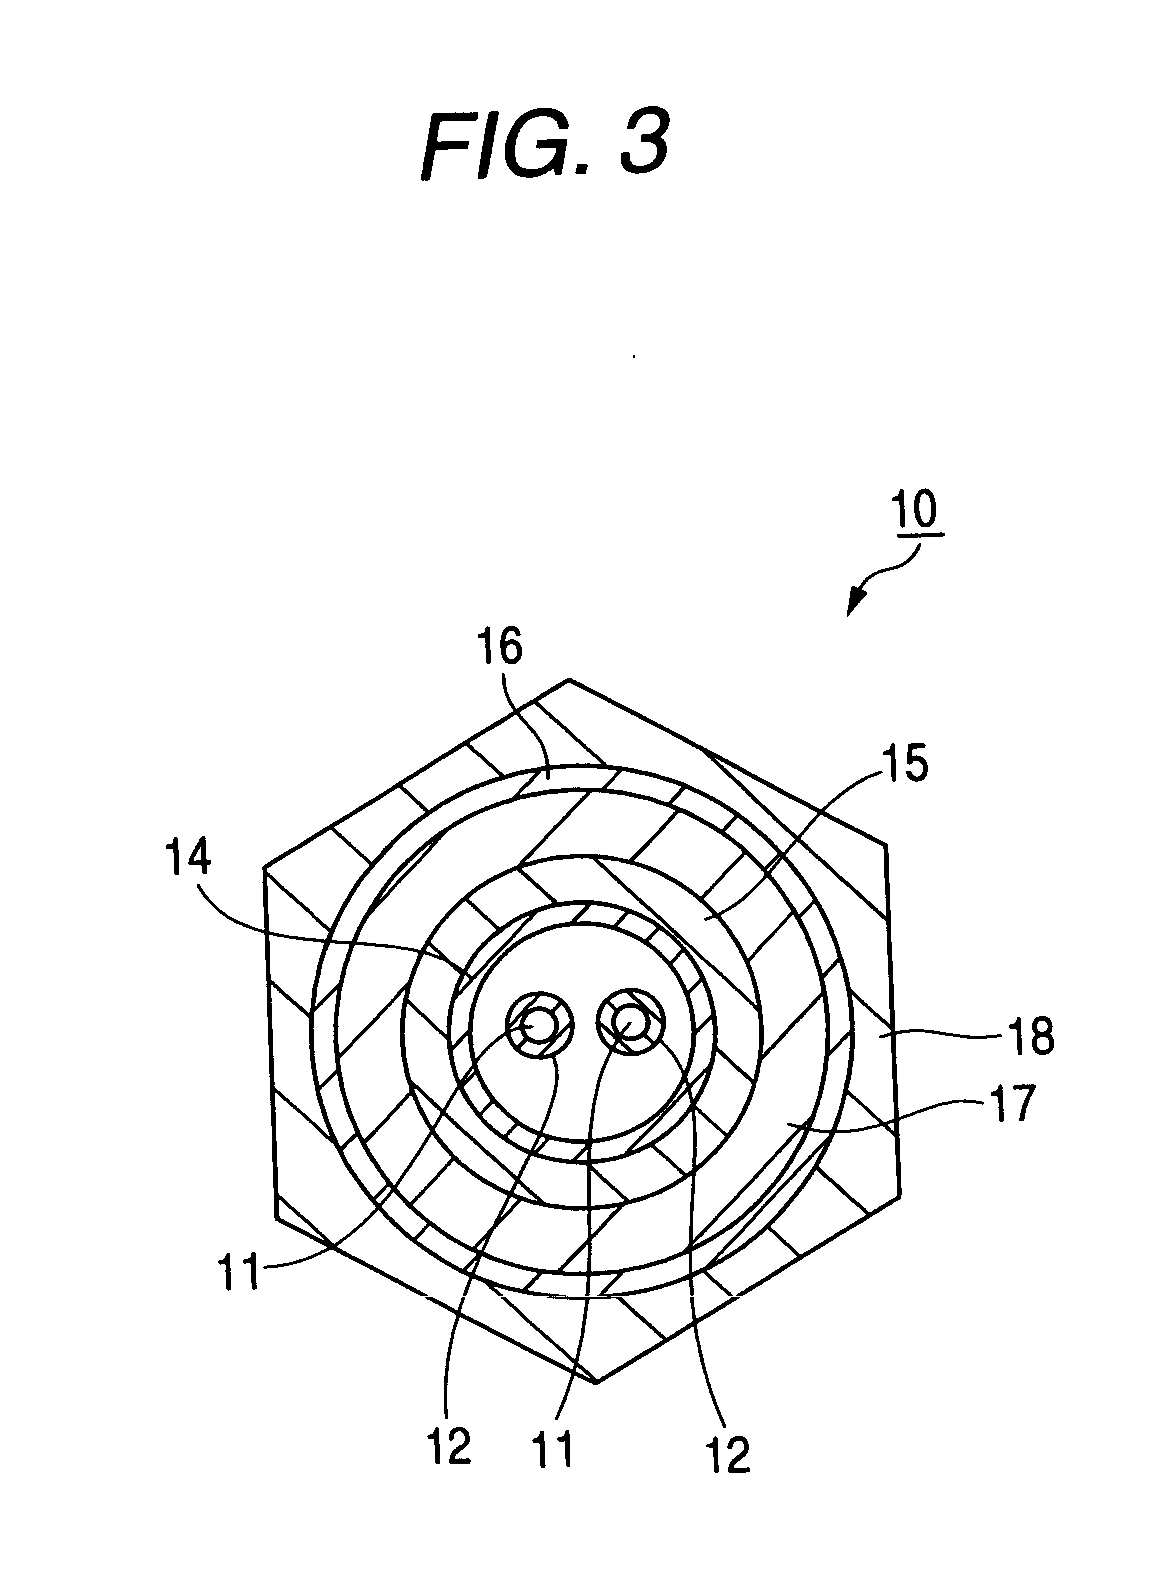 Shielded cable-grounding structure